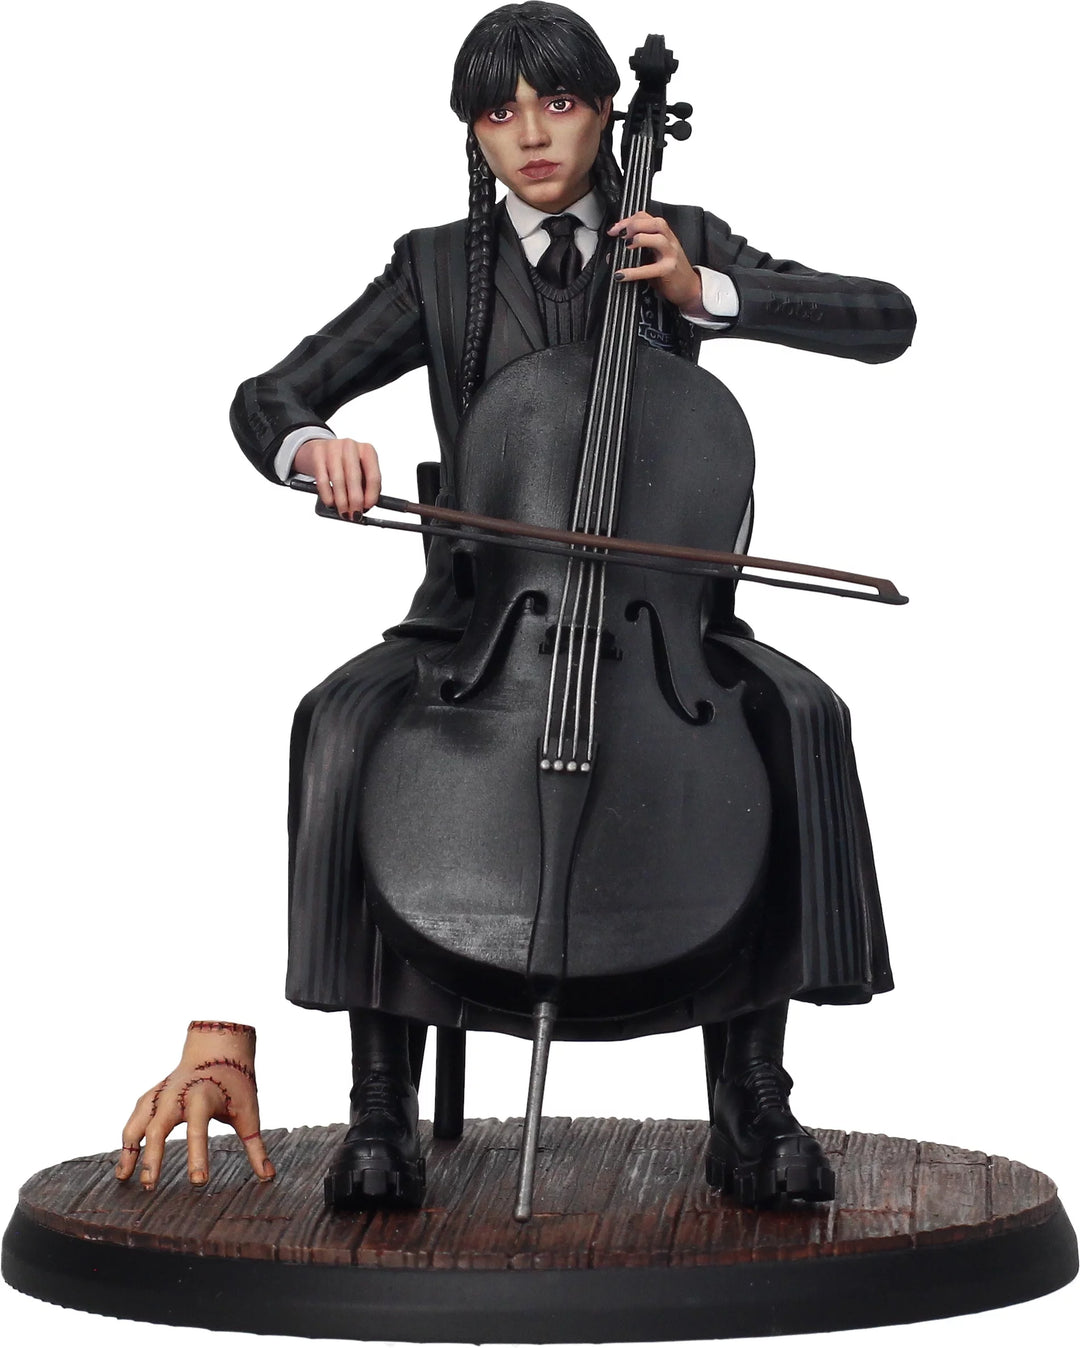 Official Wednesday Addams Wednesday With Cello Figure